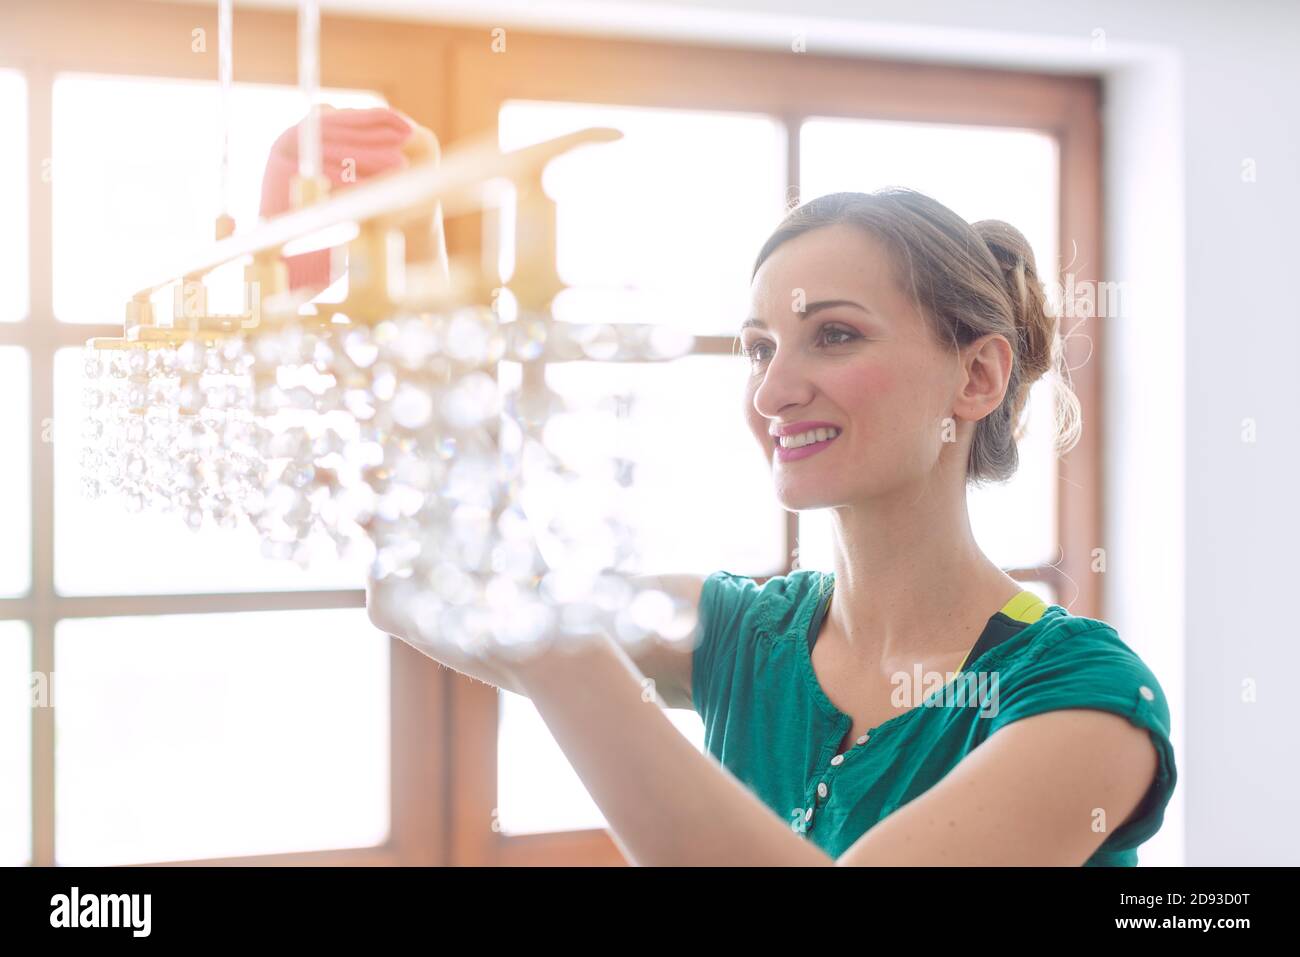 Woman dusting a lamp during spring cleaning Stock Photo